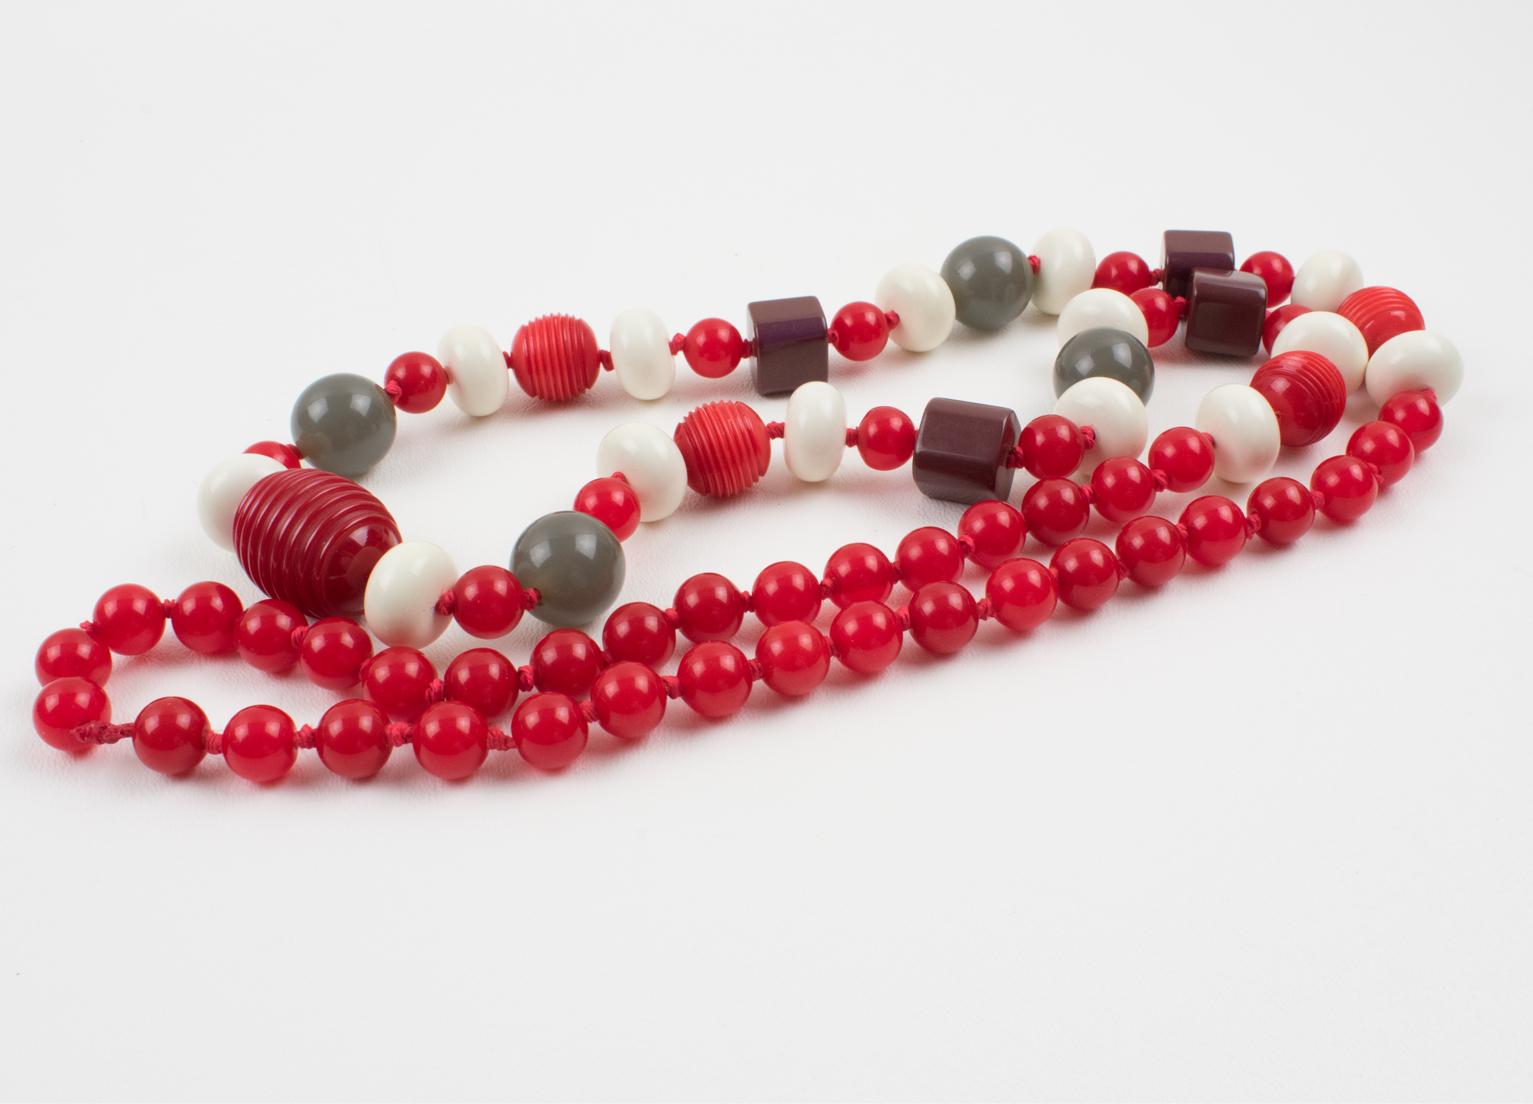 Bakelite and Lucite Long Necklace Gray, White, and Red Colors For Sale 4